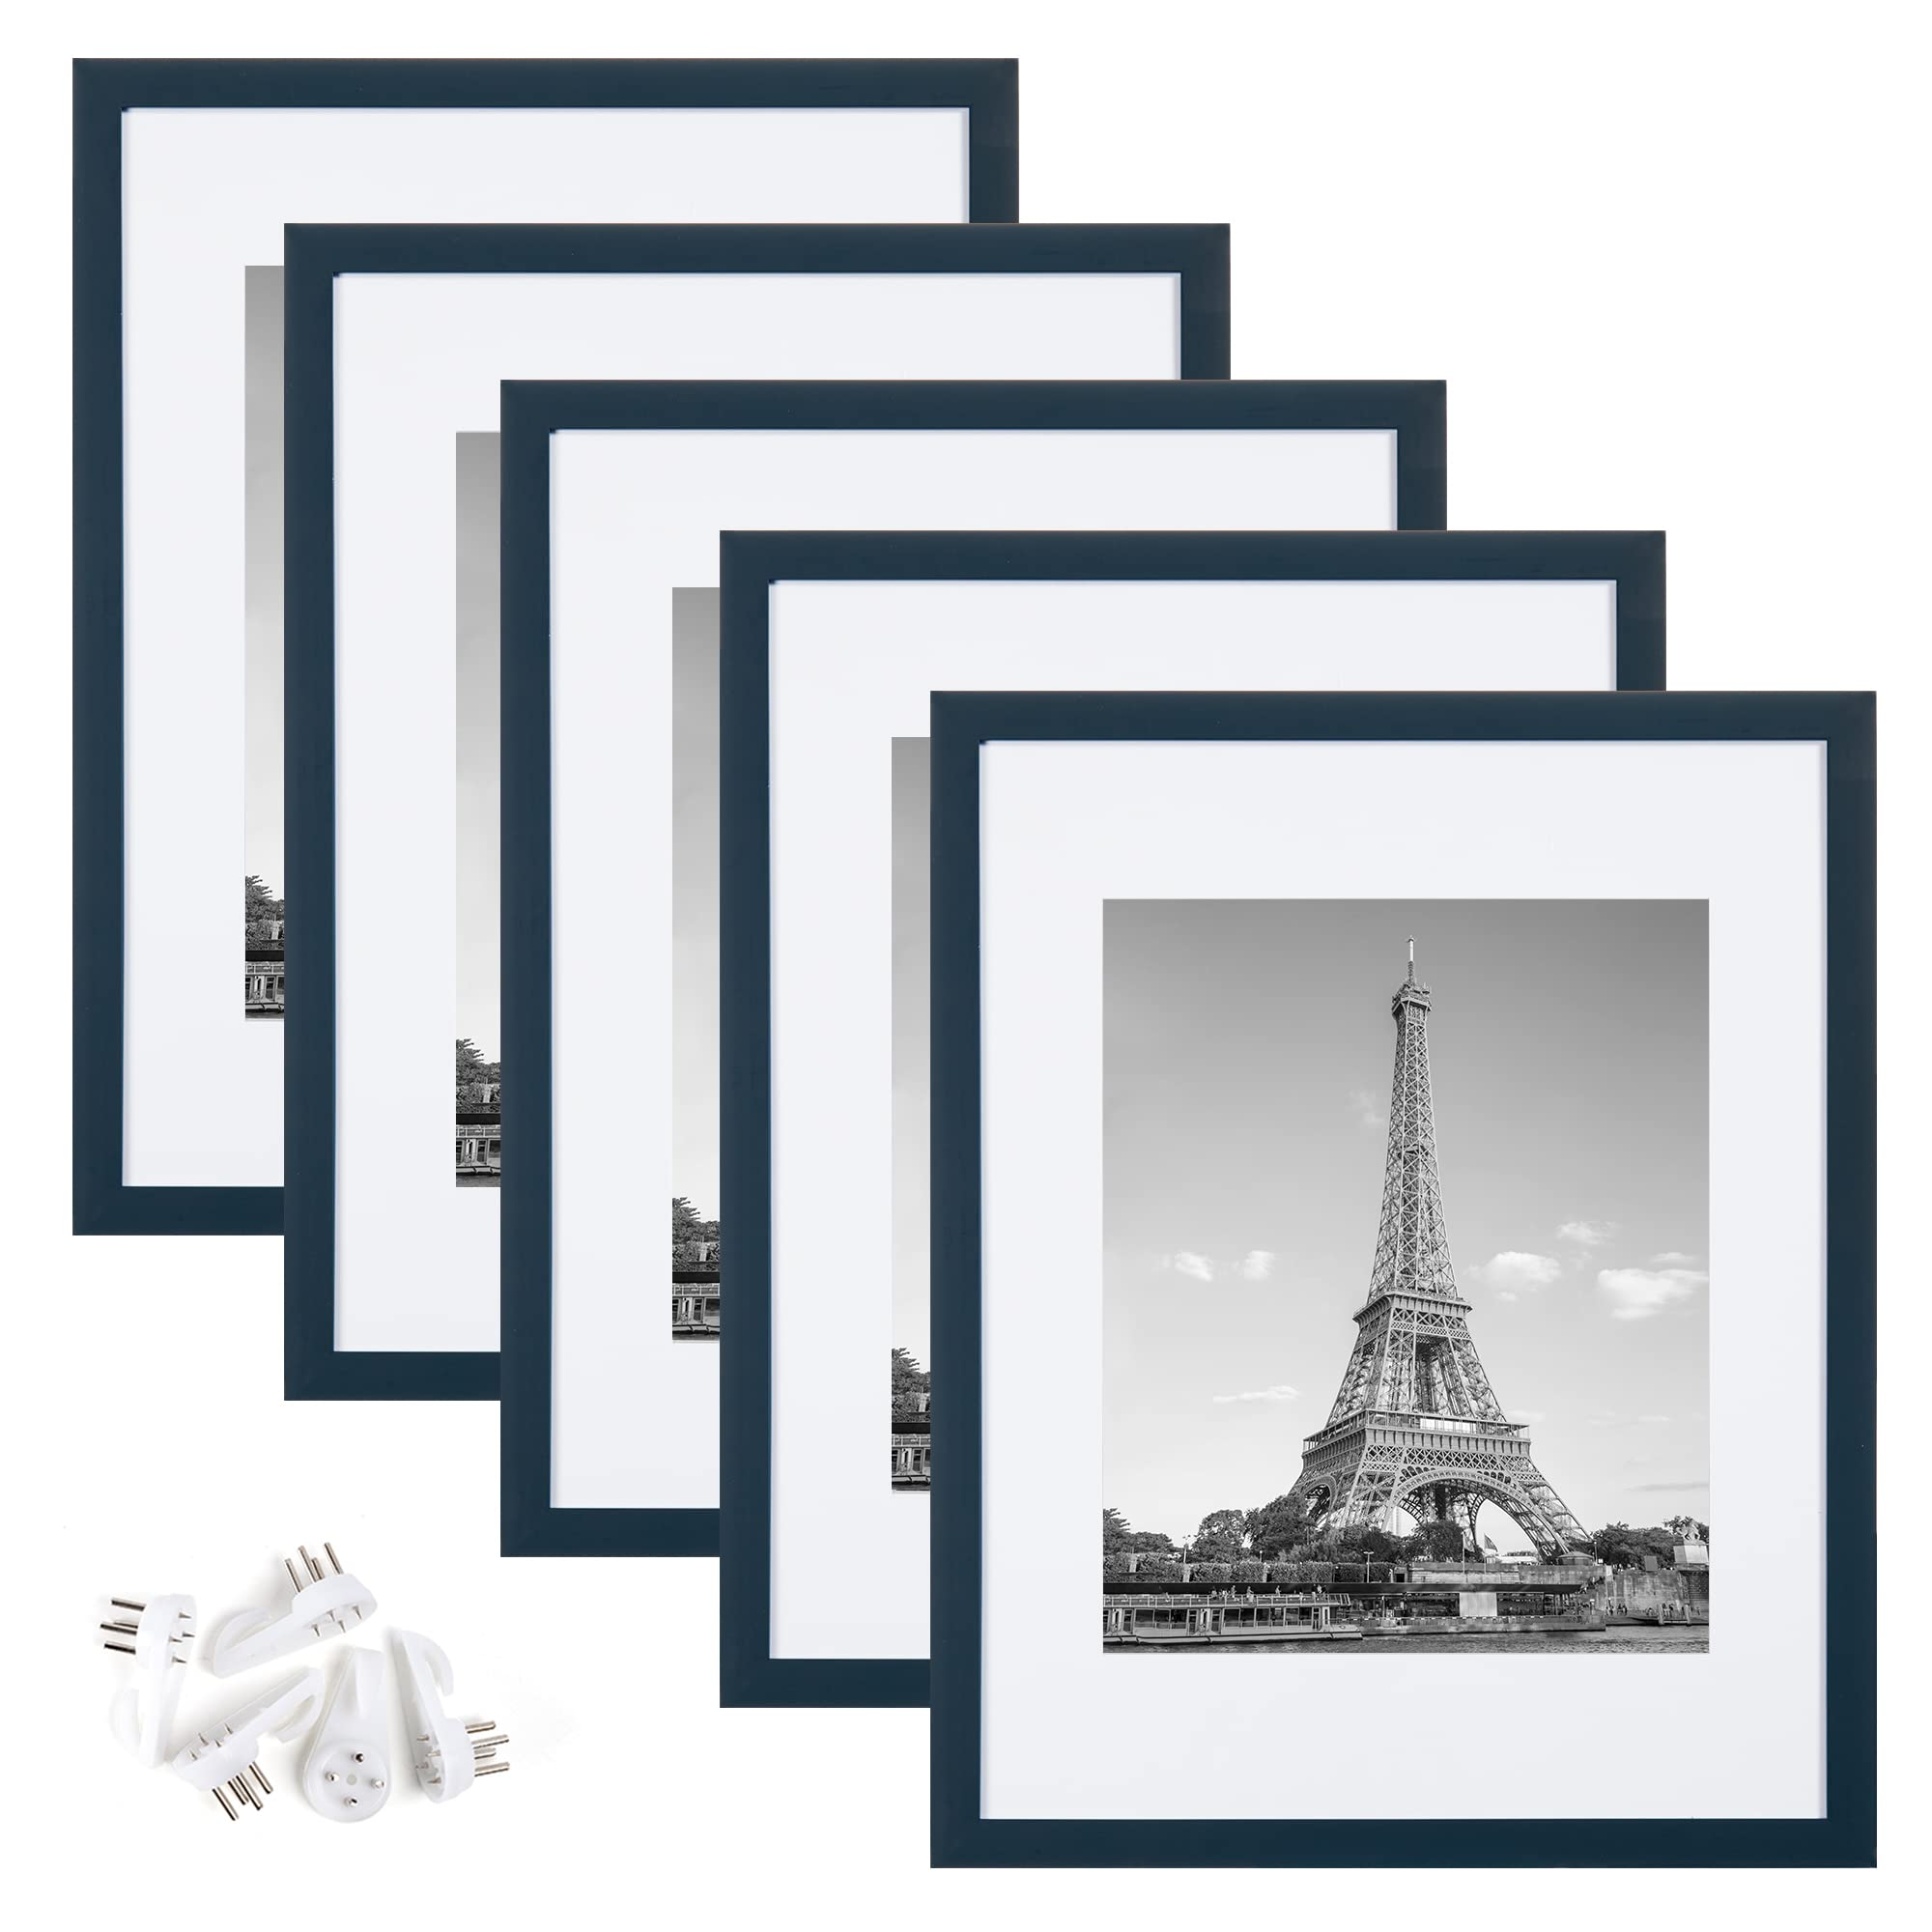 upsimples 11x14 Picture Frame Set of 3, Made of High Definition